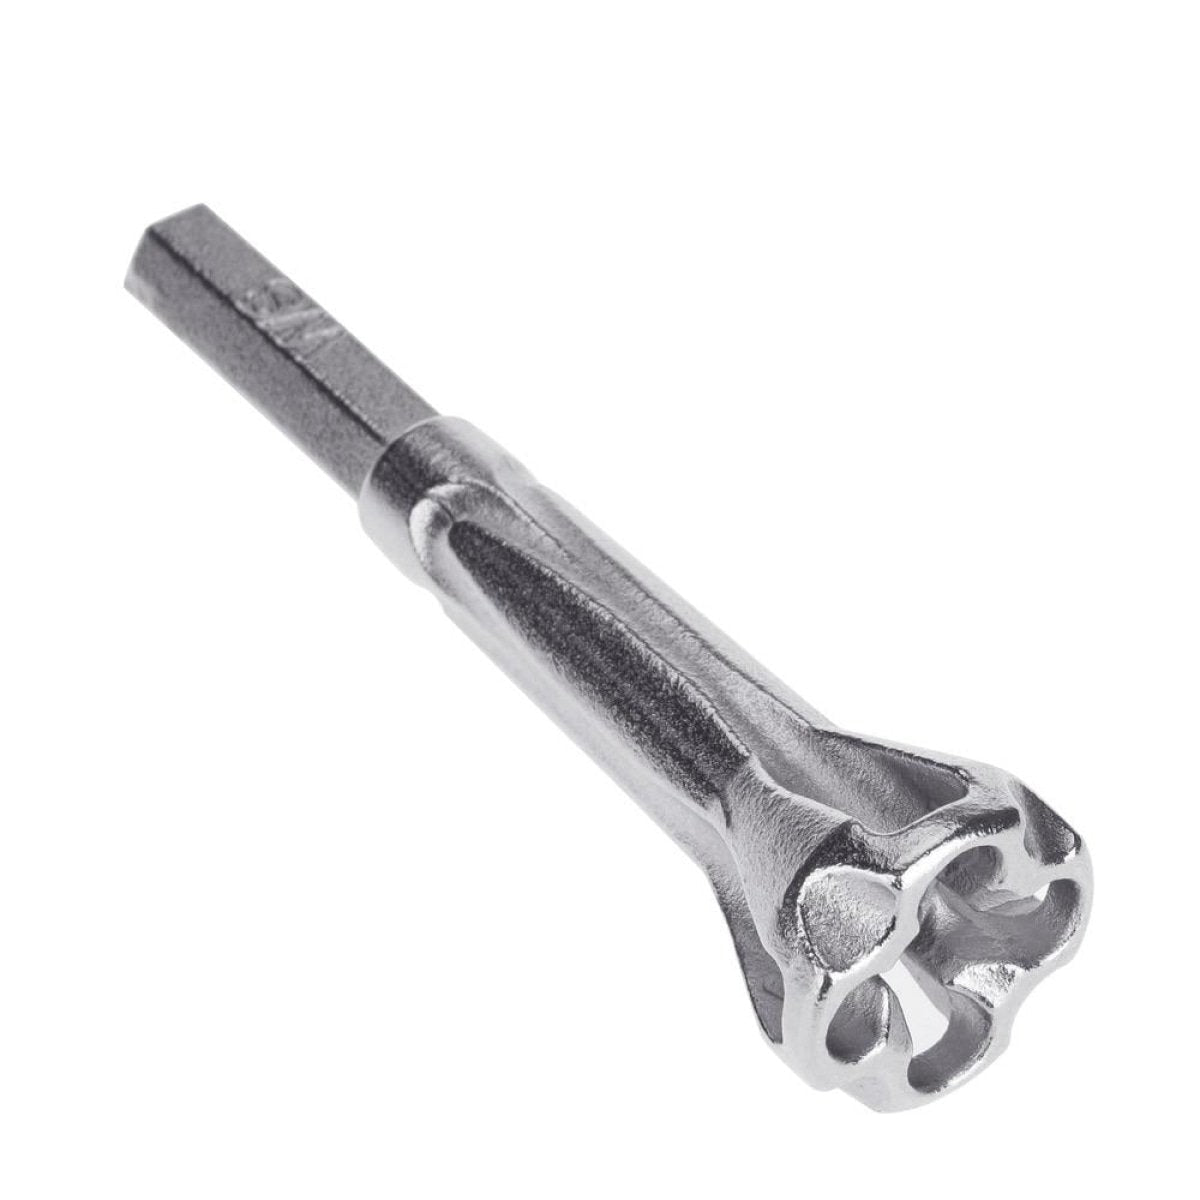 Electrical Cable Wire Twist Tool Hole Universal Automatic Connector - 4-6 Manganese steel - Asia Sell